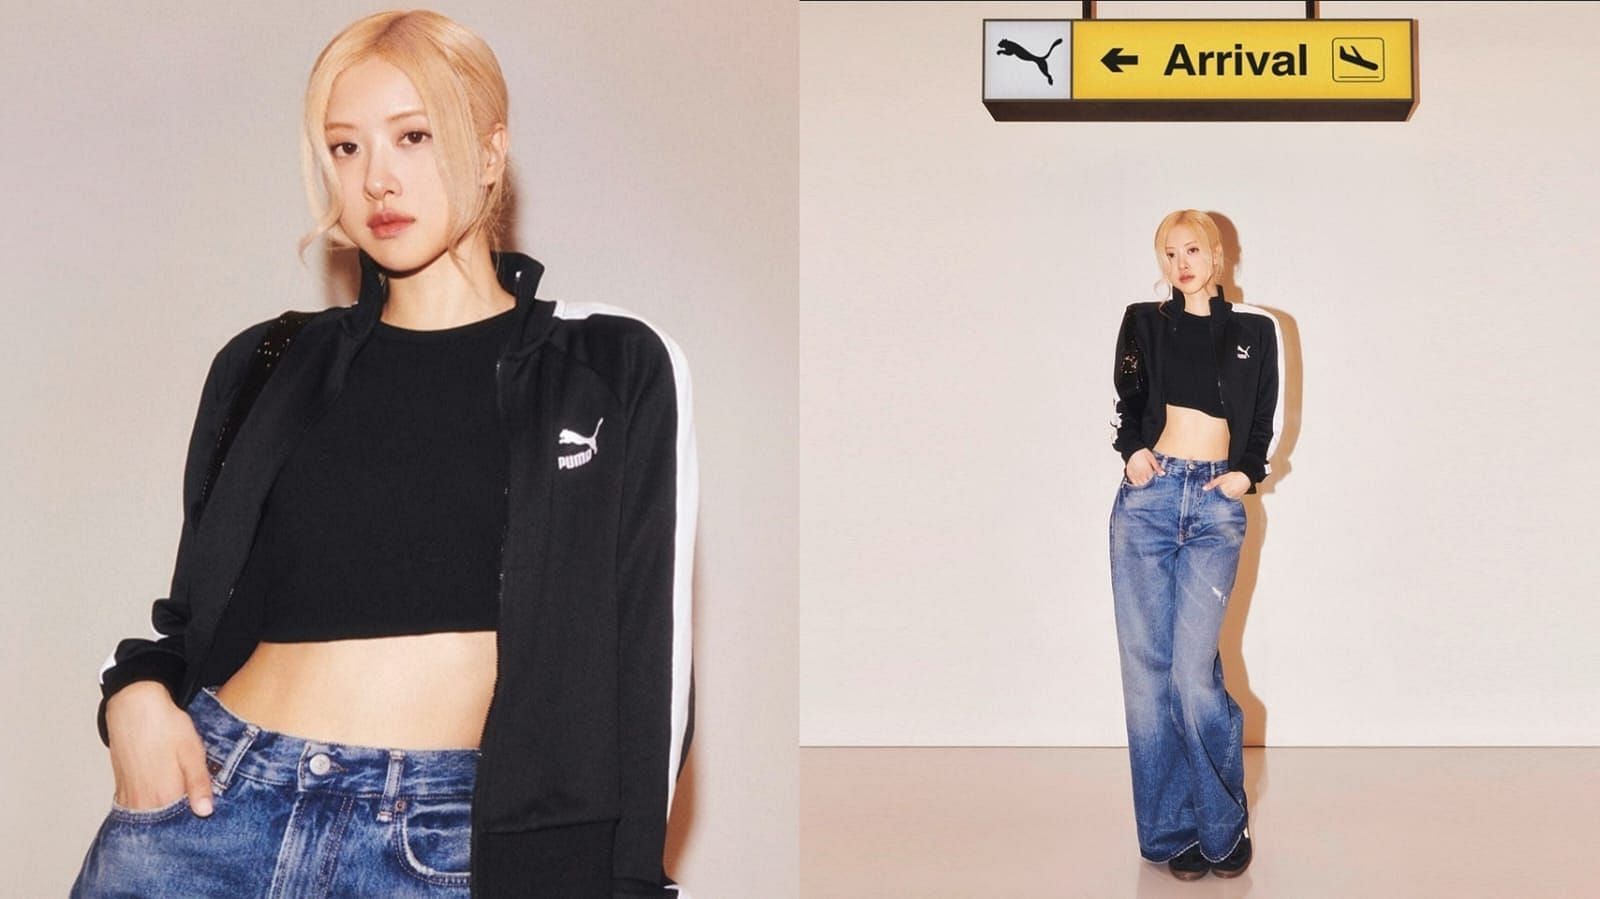 BLACKPINK Ros&eacute; officially appointed as the newest ambassador for the sportswear brand Puma (Image via @pumasportsstyle/Instagram)